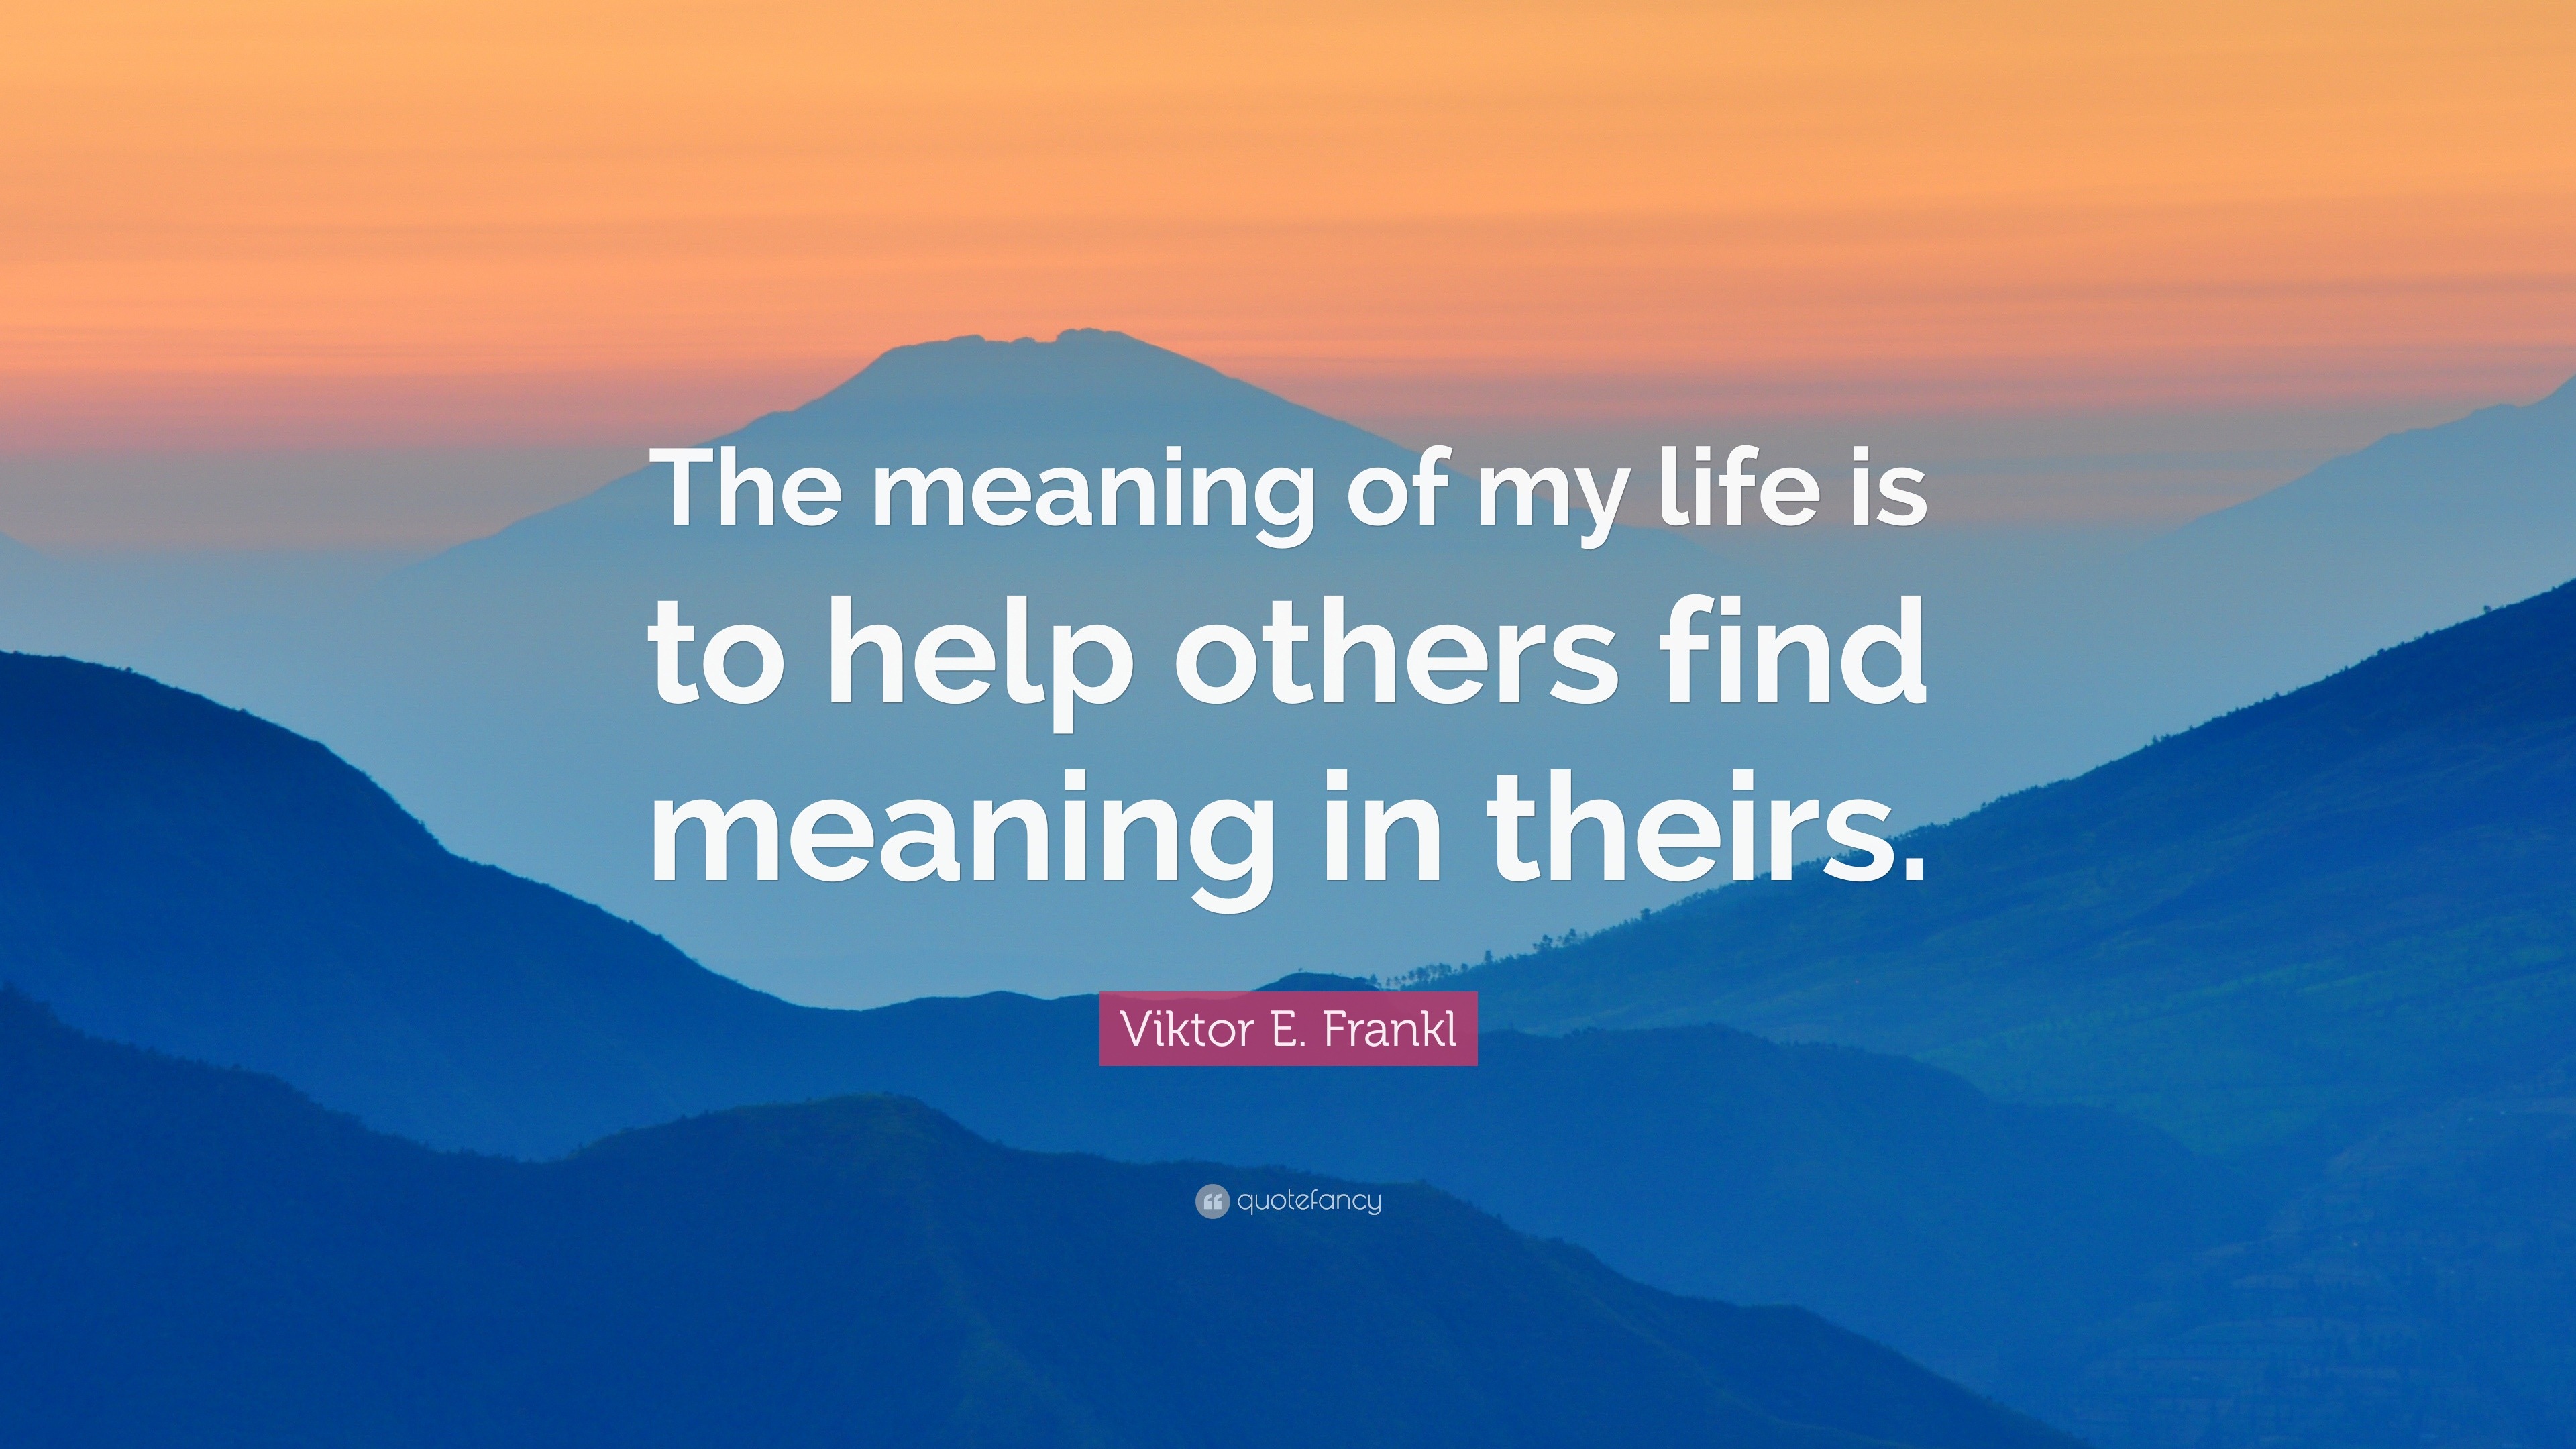 Viktor E Frankl Quote “The meaning of my life is to help others